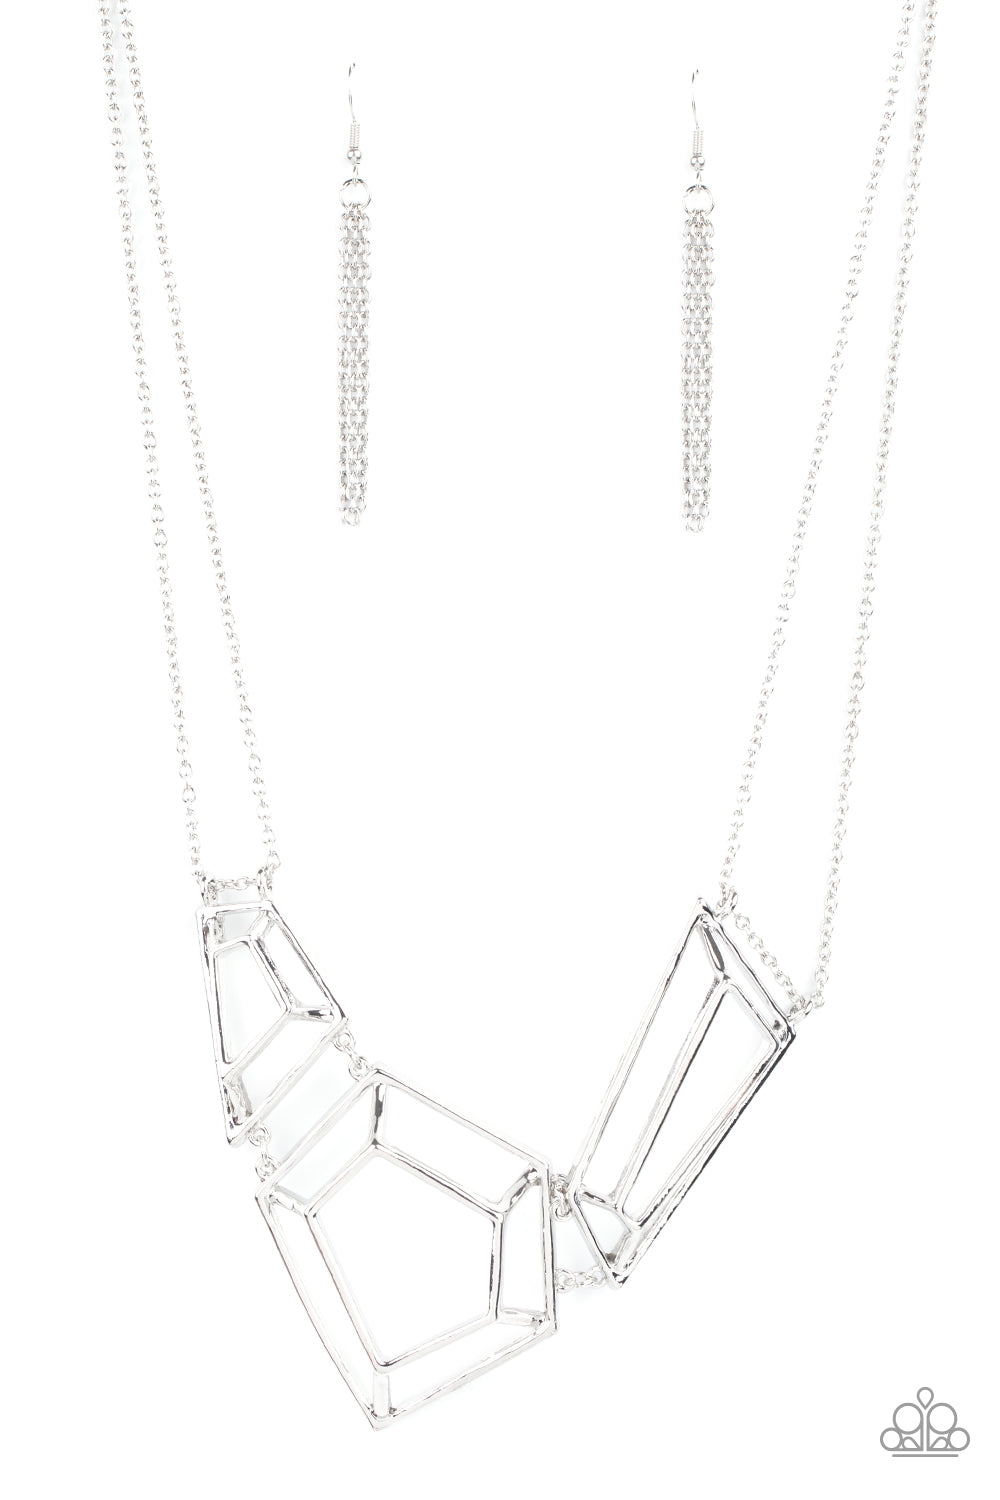 3-D Drama - Silver Necklaces glistening silver bars connect into edgy 3-dimensional frames below the collar, creating a bold geometric statement piece. Features an adjustable clasp closure.  Sold as one individual necklace. Includes one pair of matching earrings.  Paparazzi Jewelry is lead and nickel free so it's perfect for sensitive skin too!